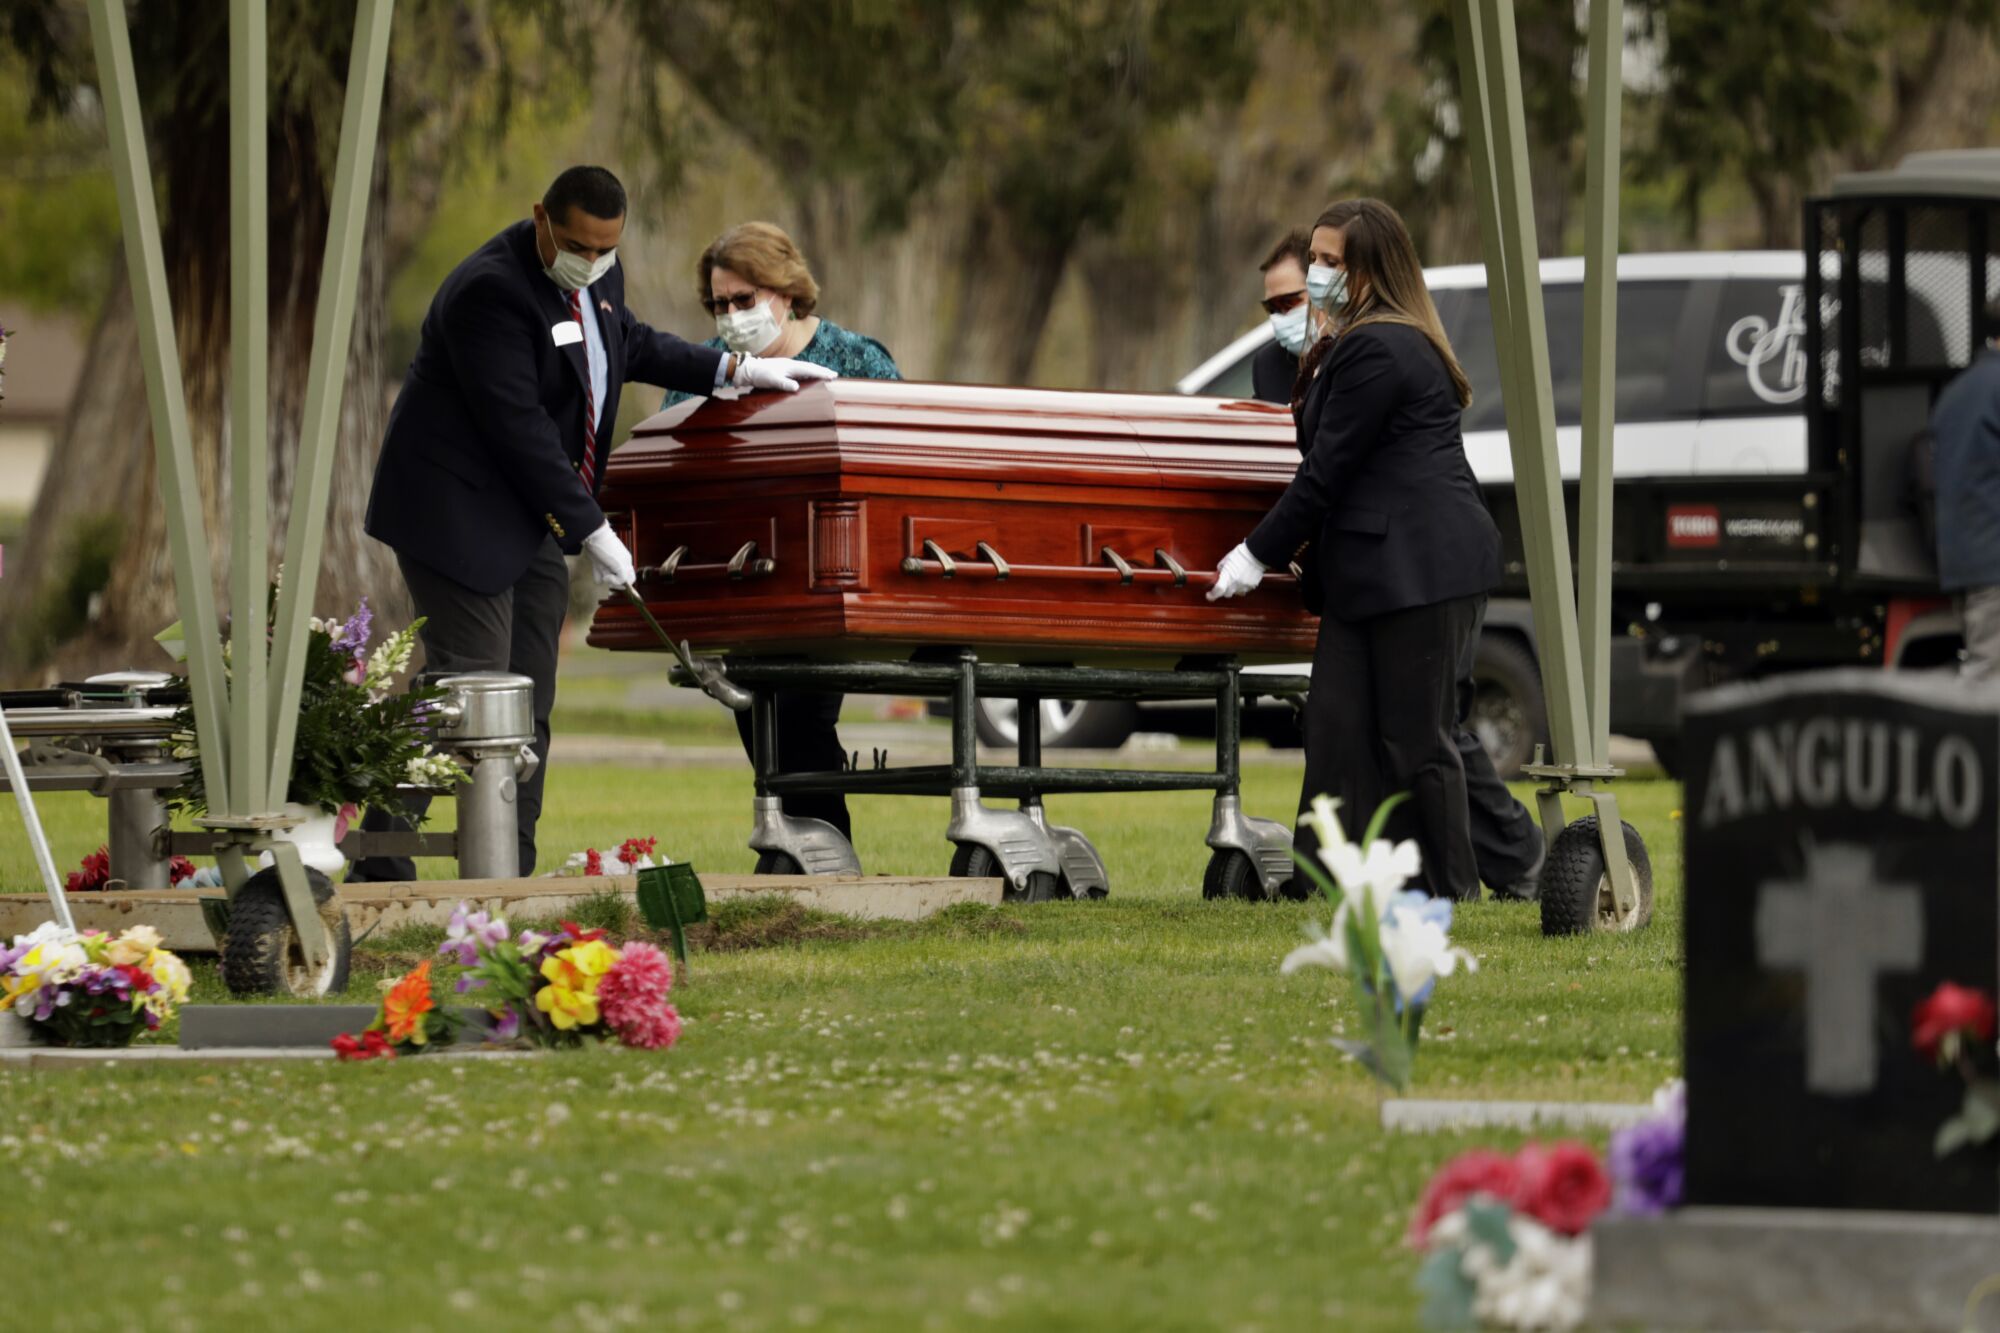 Wanda DeSelle, 76, died of COVID-19 on April 3 in Madera, Calif. Funeral director Sarah Smith, far right, and other members of Jay Chapel funeral home bring the body to the grave site on April 8. Immediate family members had to remain in their cars as DeSelle was buried.